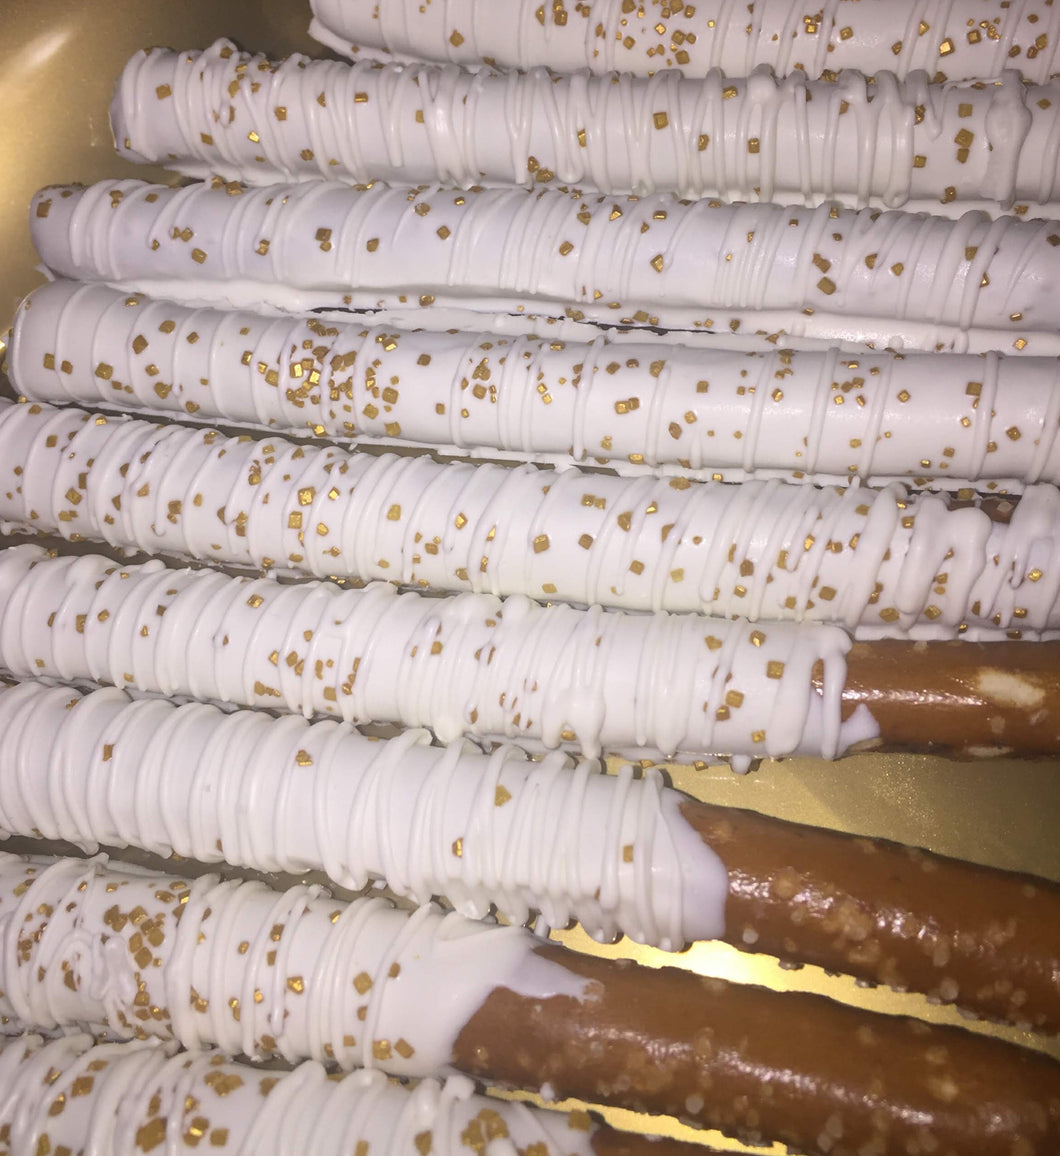 Pretzel Rods - Chocolate Covered/Dipped (White w/ Gold Sprinkles)